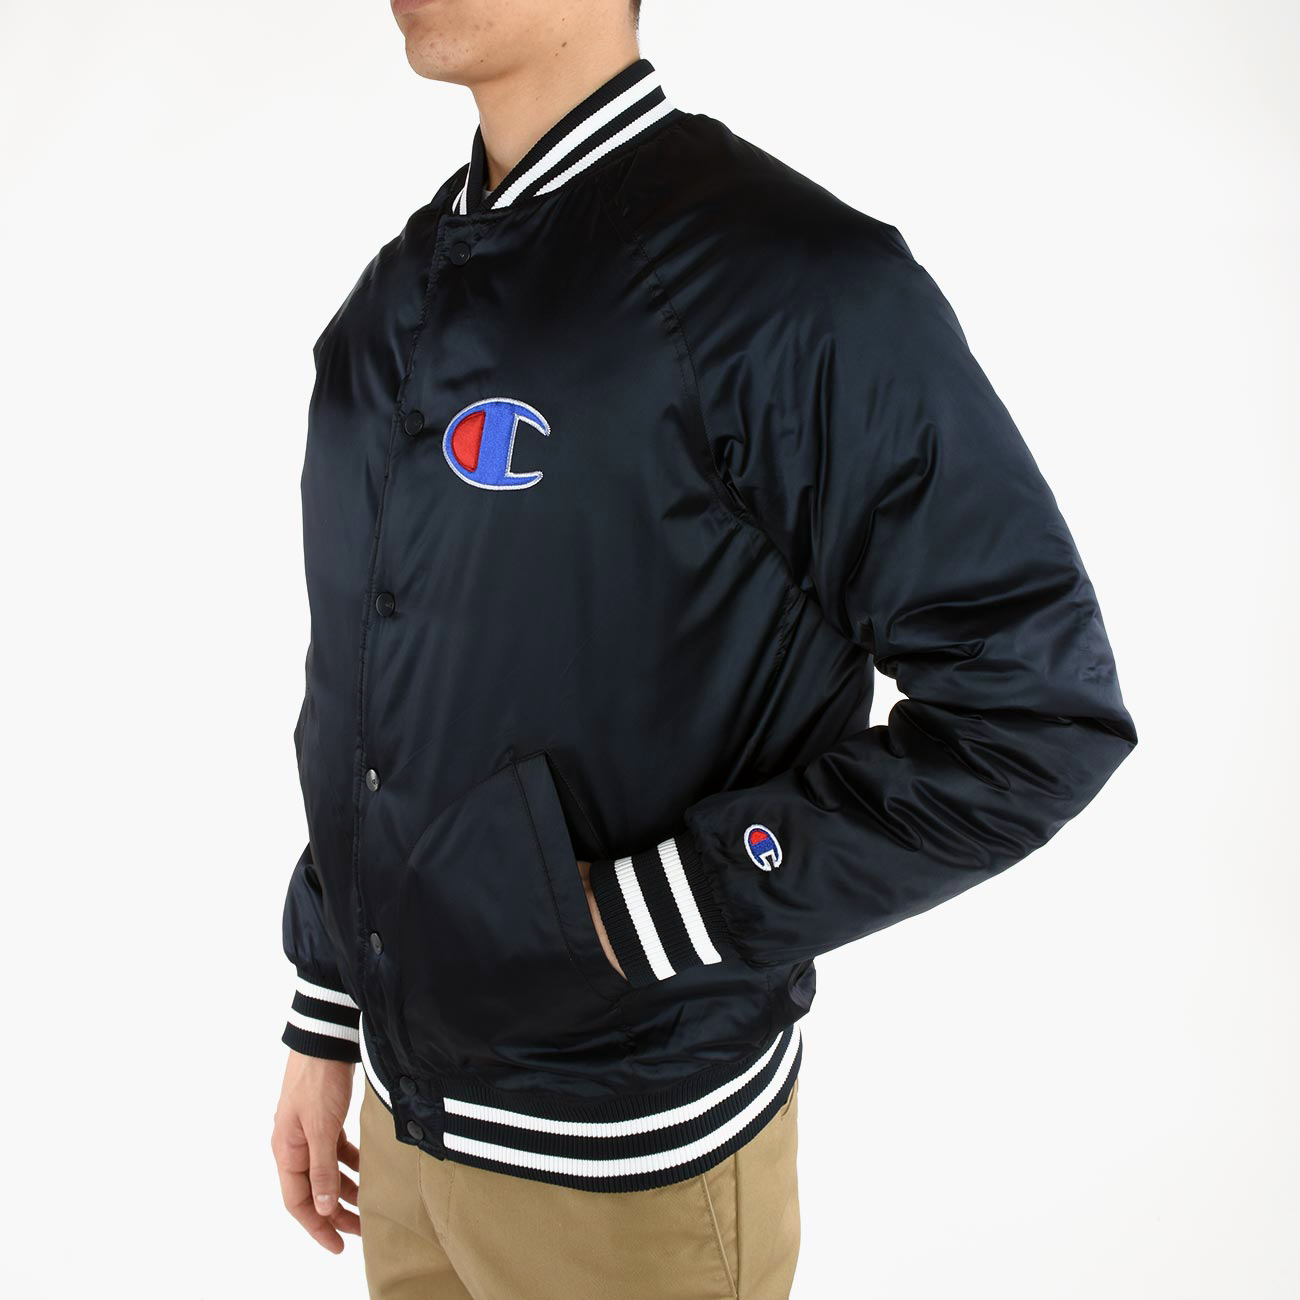 Champion Bomber Jacket - Clothes Jackets - Sporting goods | sil.lt